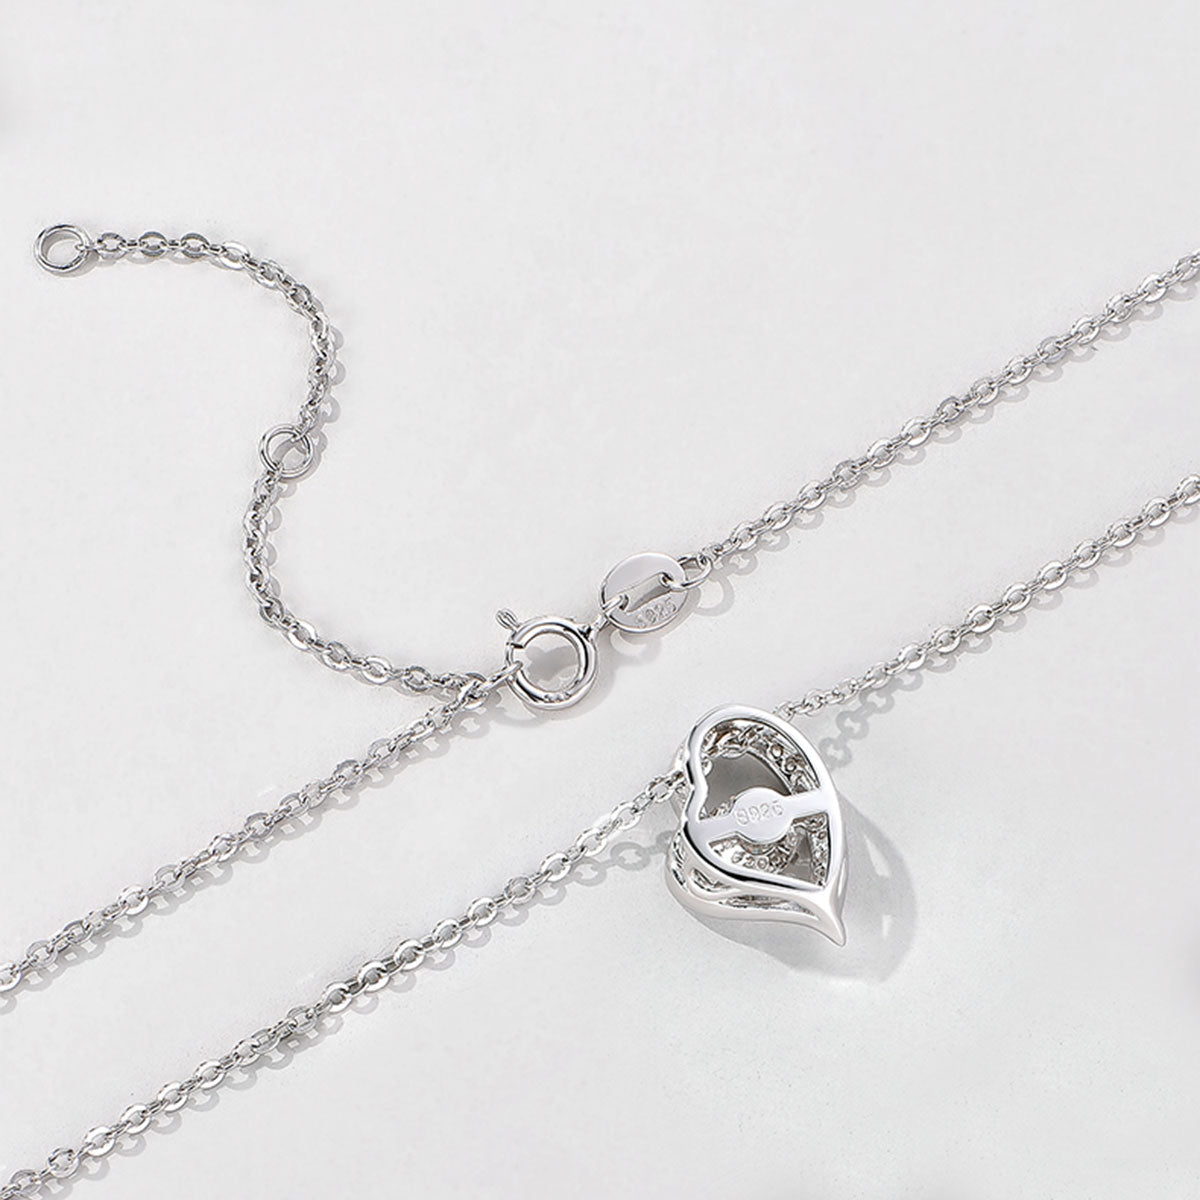 White Gold Hollow Heart Shape Beating Shinny Pendants Chains